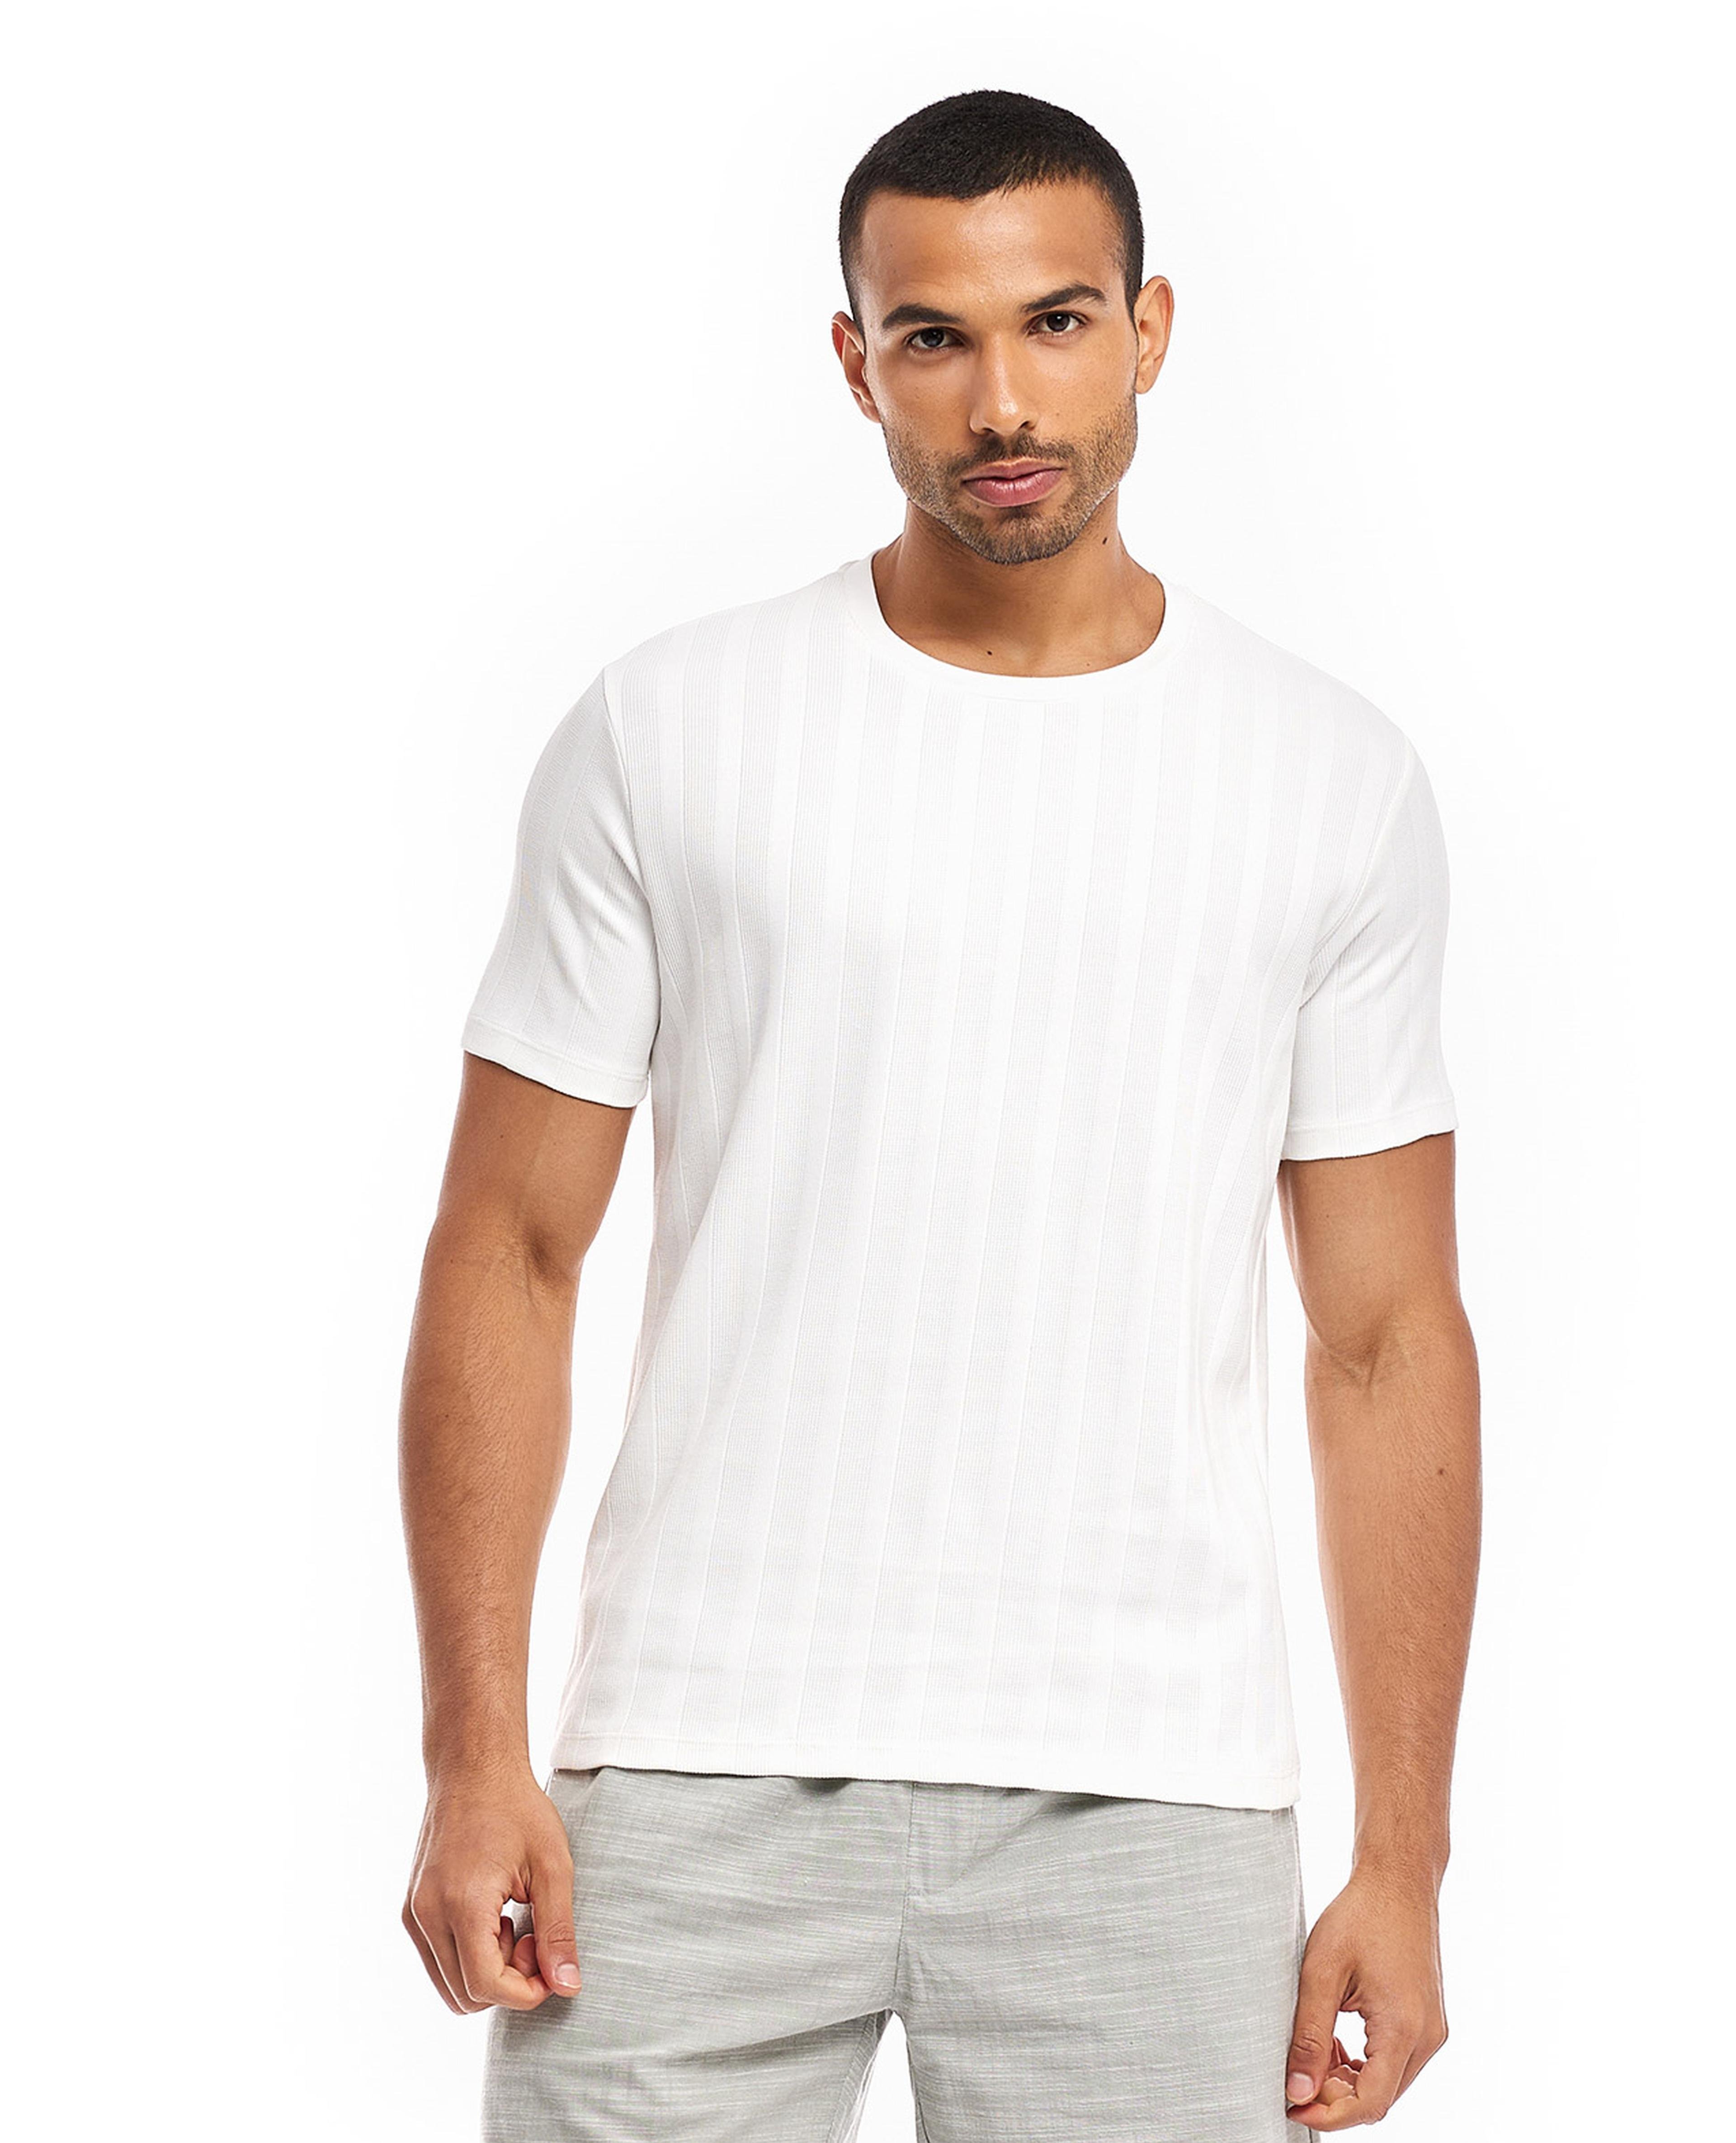 Self Patterned T-Shirt with Crew Neck and Short Sleeves